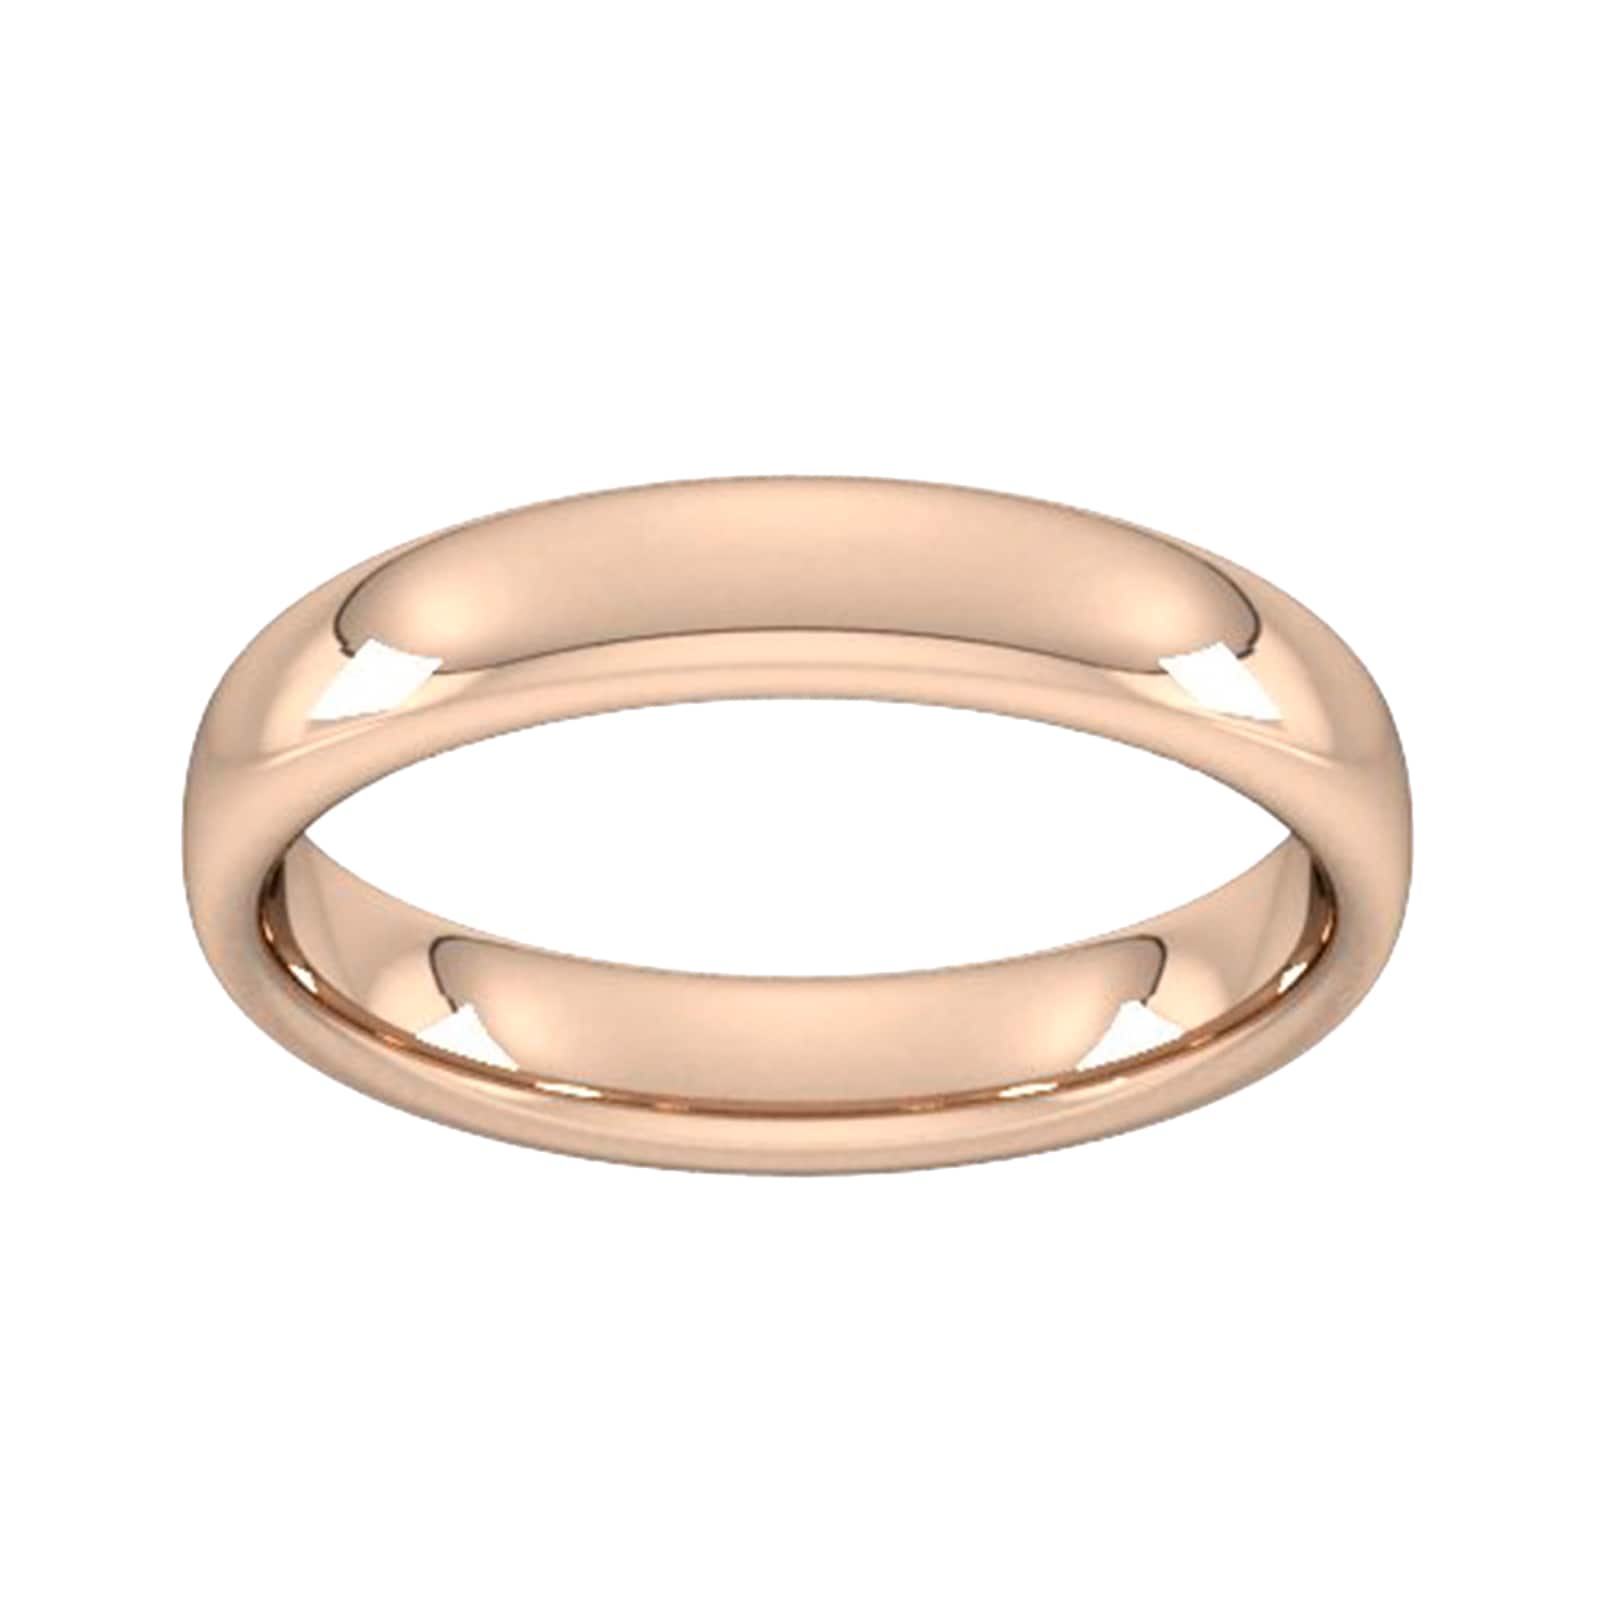 4mm Slight Court Heavy Wedding Ring In 18 Carat Rose Gold - Ring Size S